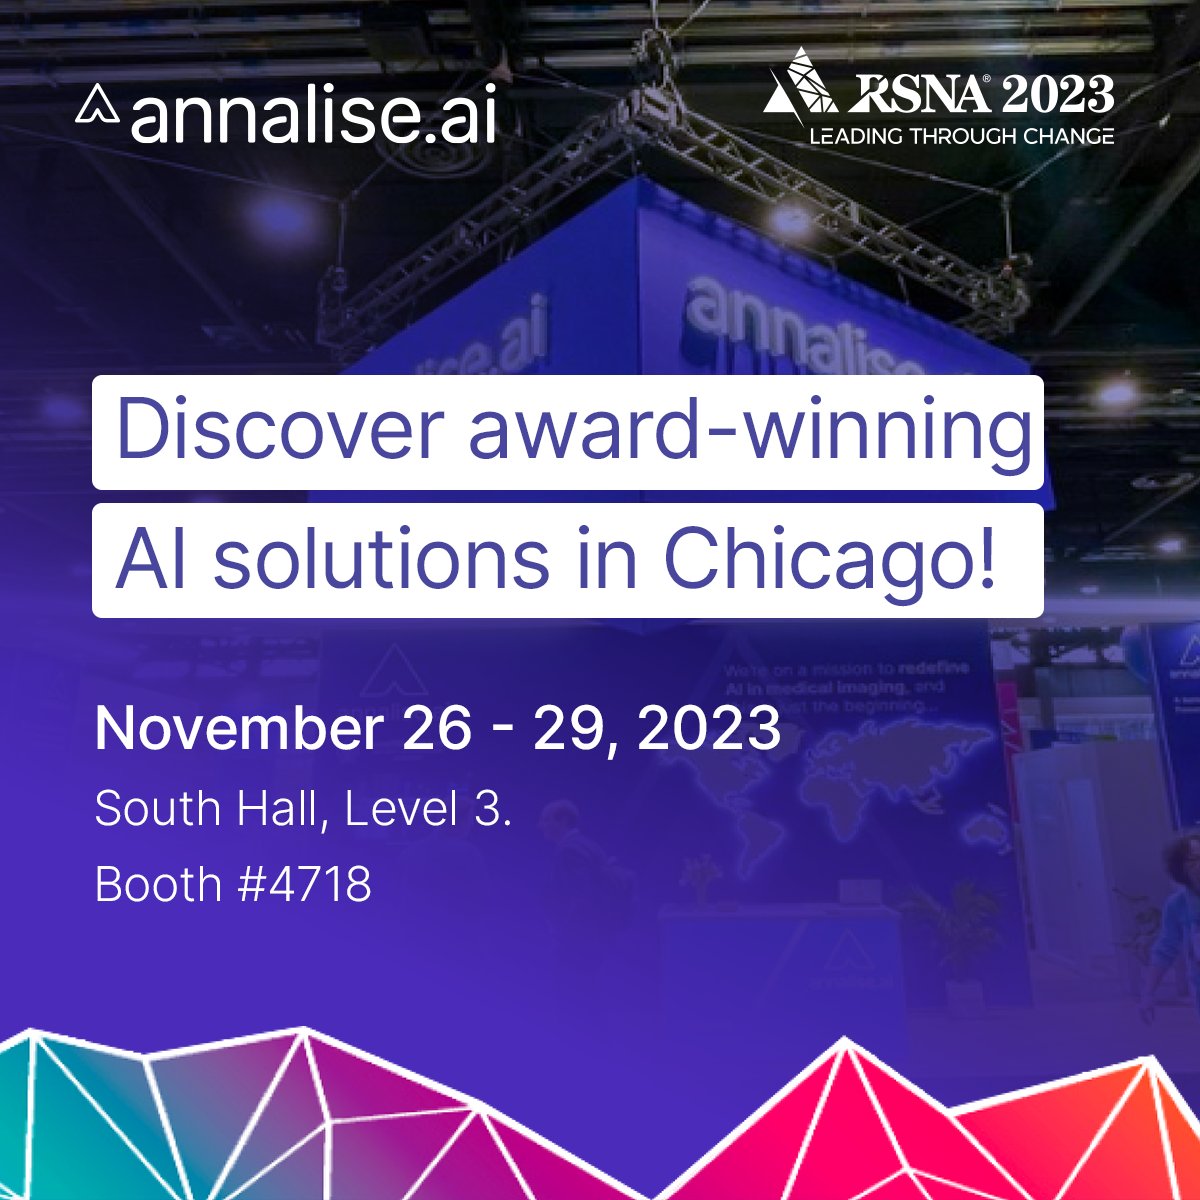 And we are on! Looking forward to meeting you if you're at #RSNA23! Head over for coffee and conversations at the @annalise_ai booth #AnnaliseInAction